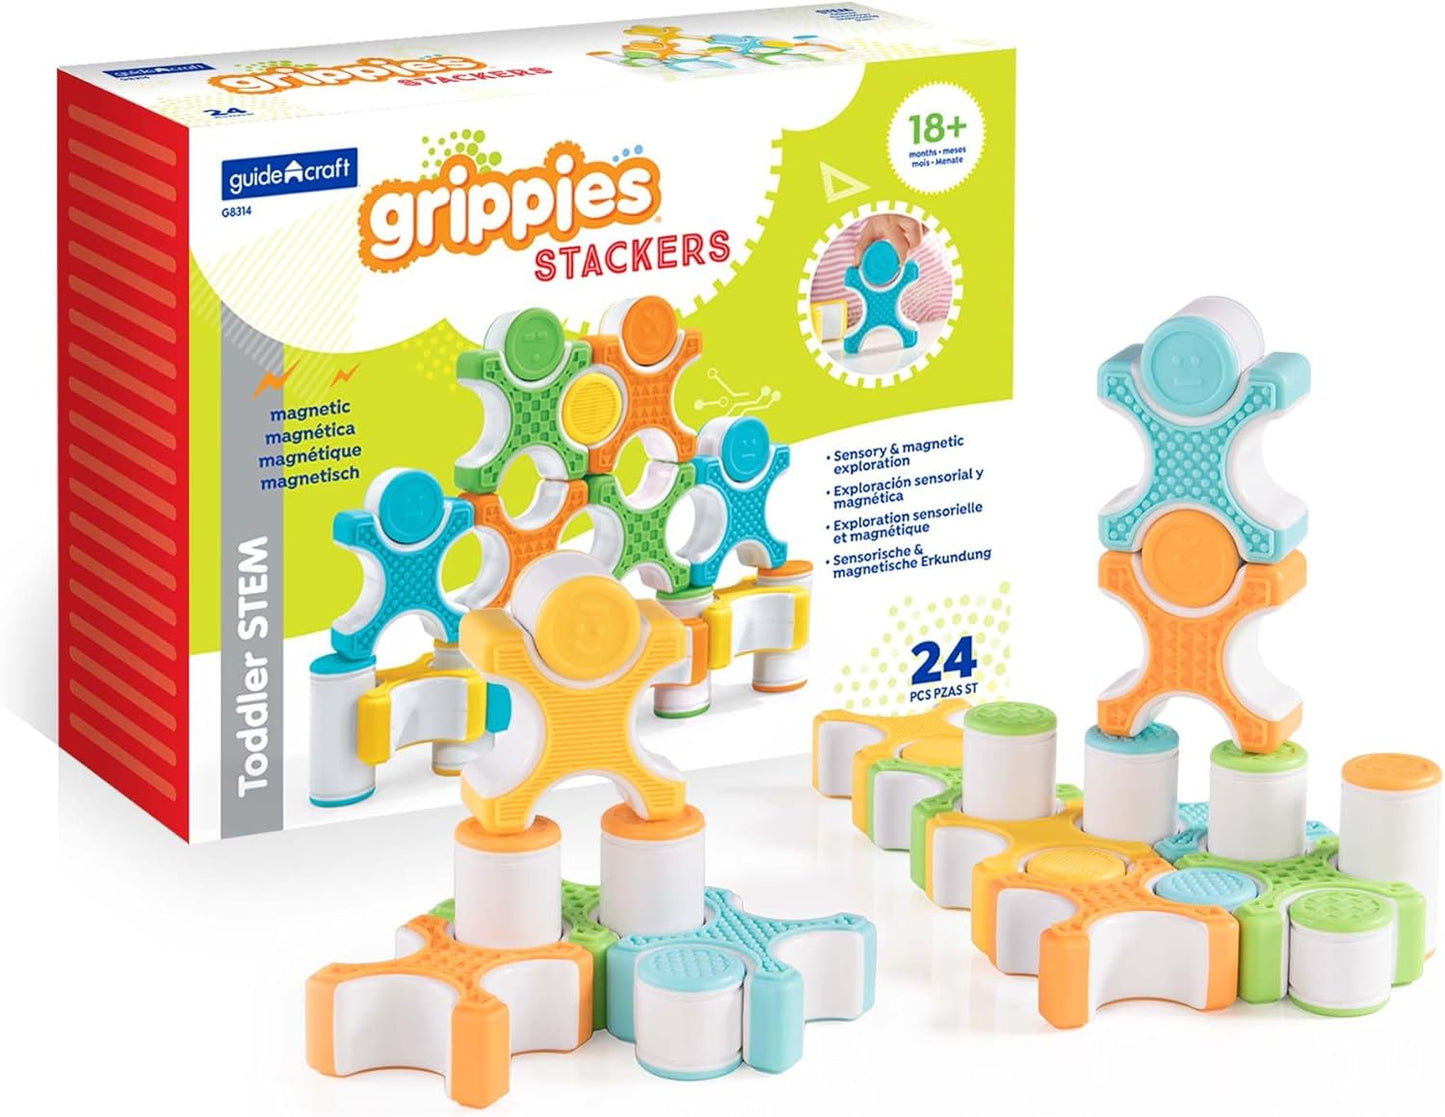 Grippies Waves - 20 Piece Set: STEM Magnetic Building Set for Toddlers, Kids Learning and Educational Toys